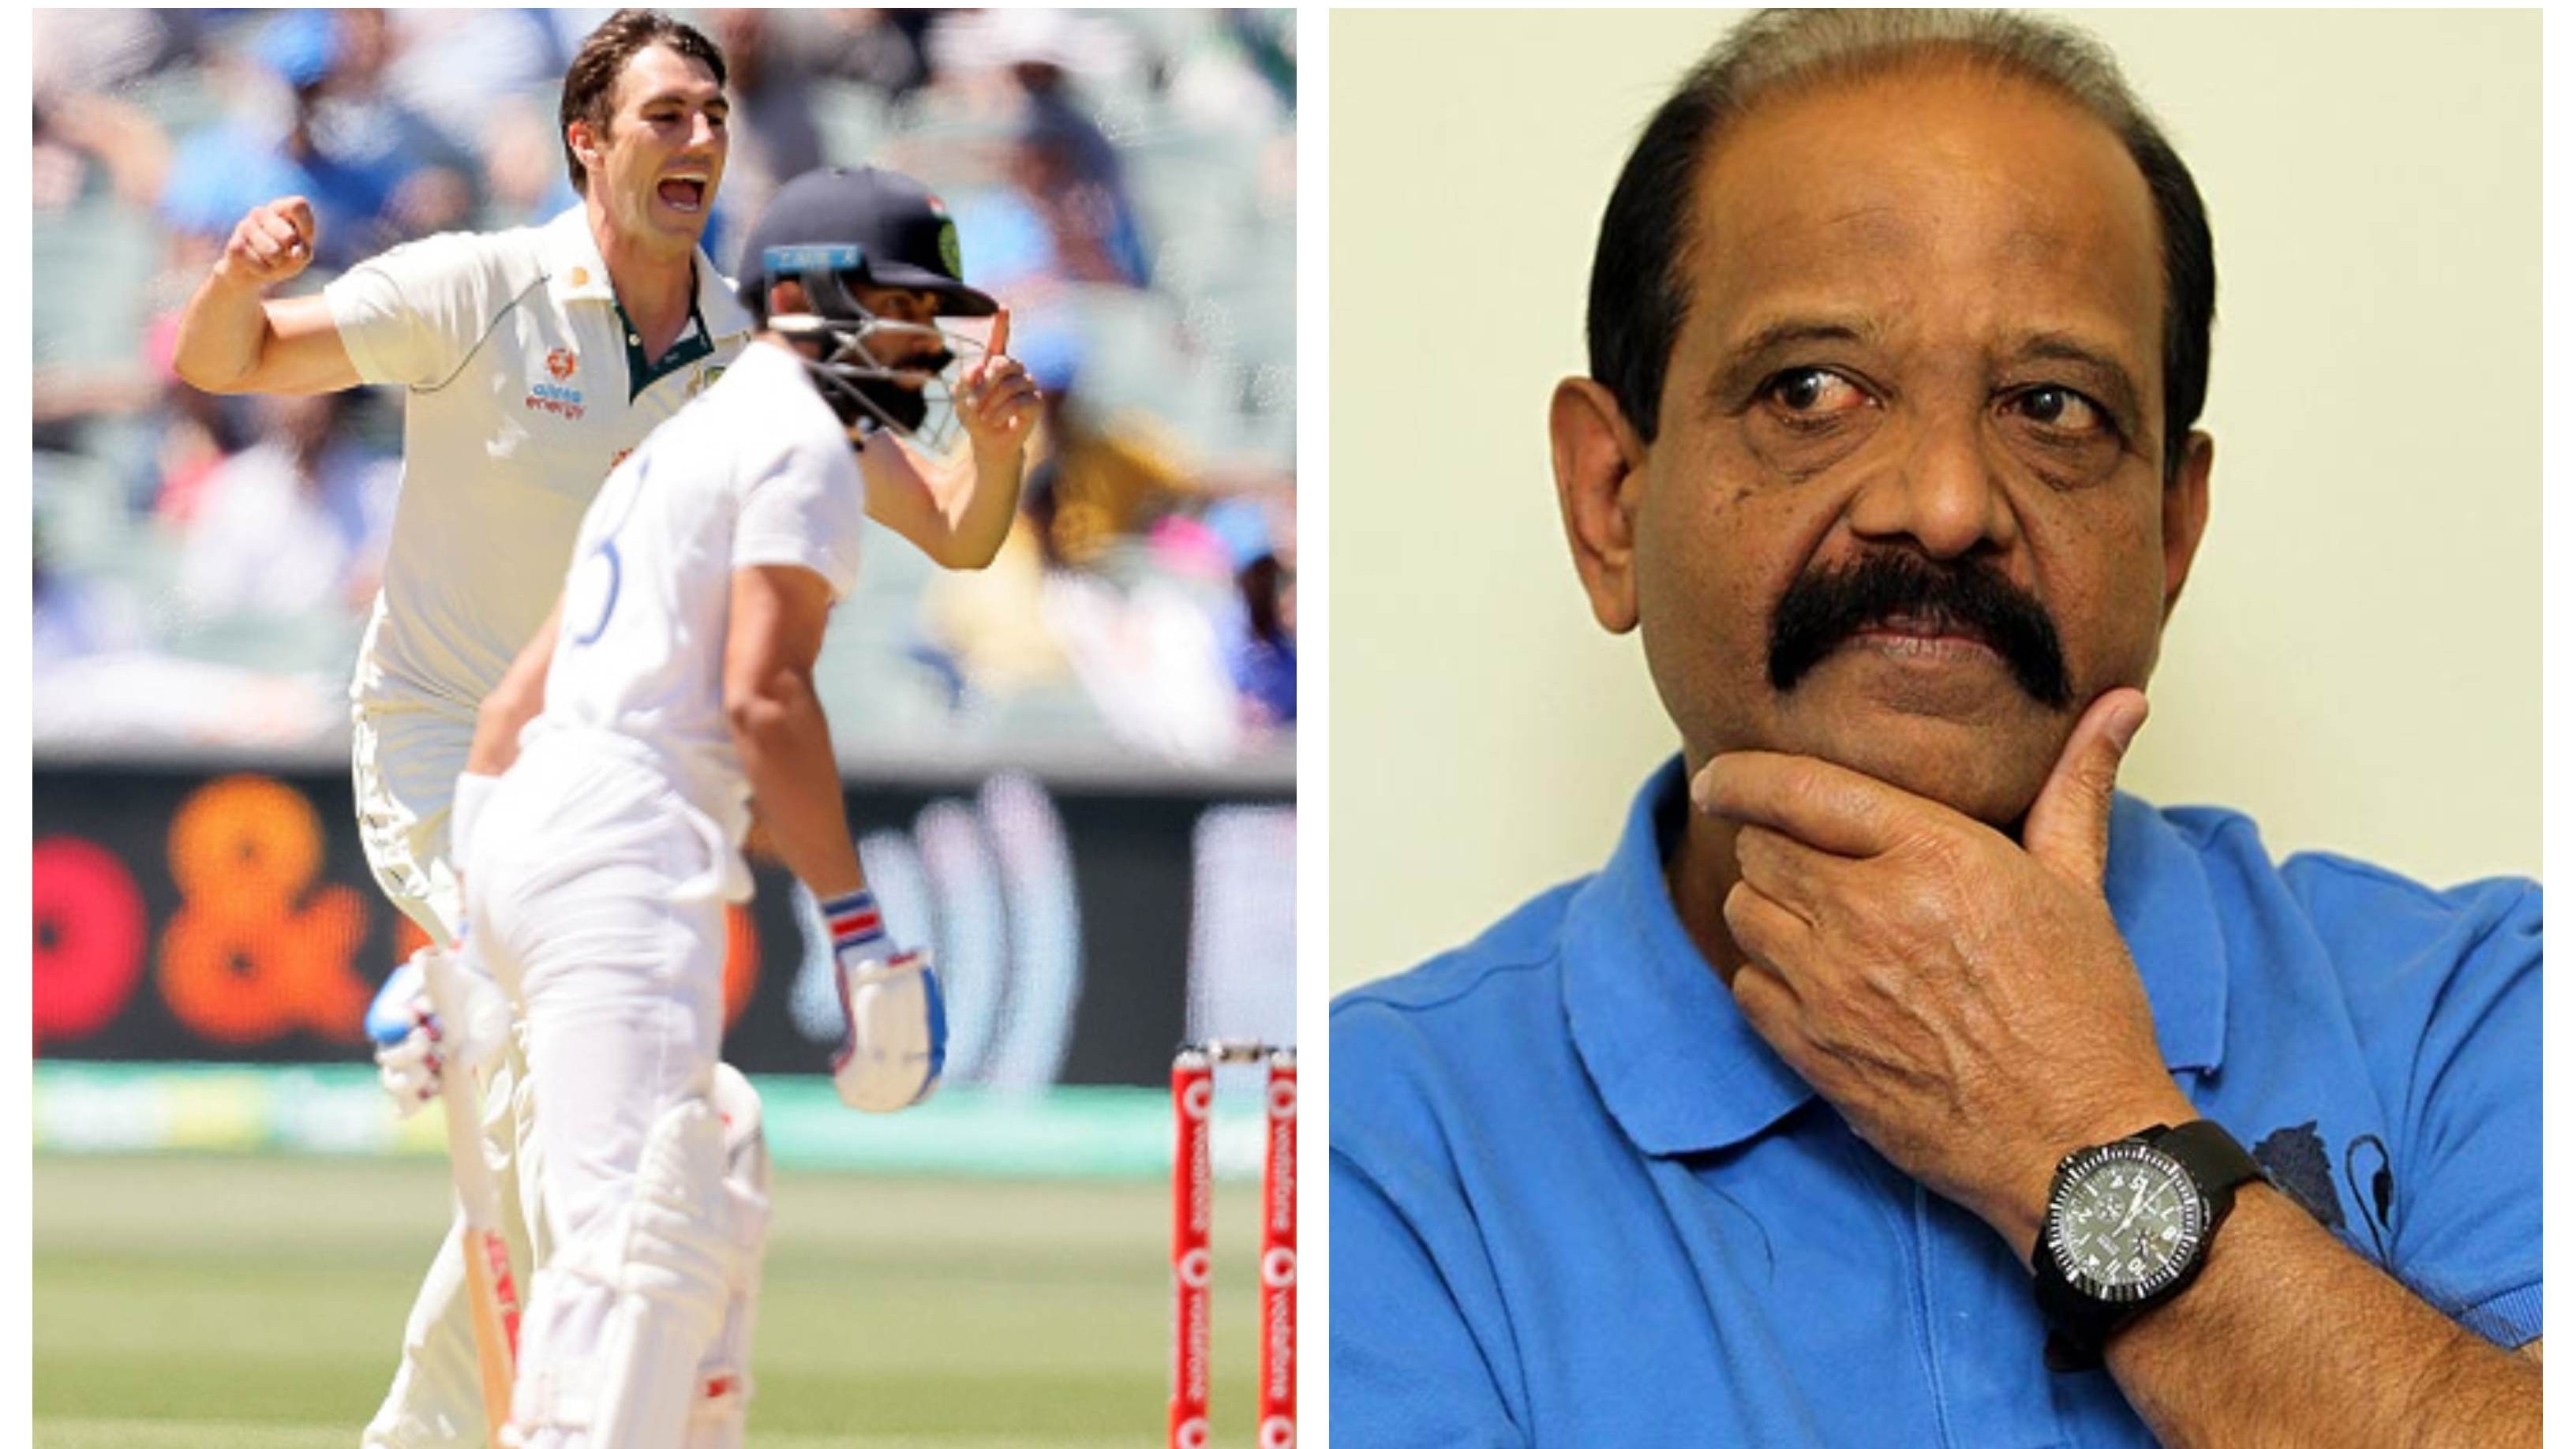 AUS v IND 2020-21: ‘Never thought I would see India getting all out for 42 or less again’ – Gundappa Viswanath